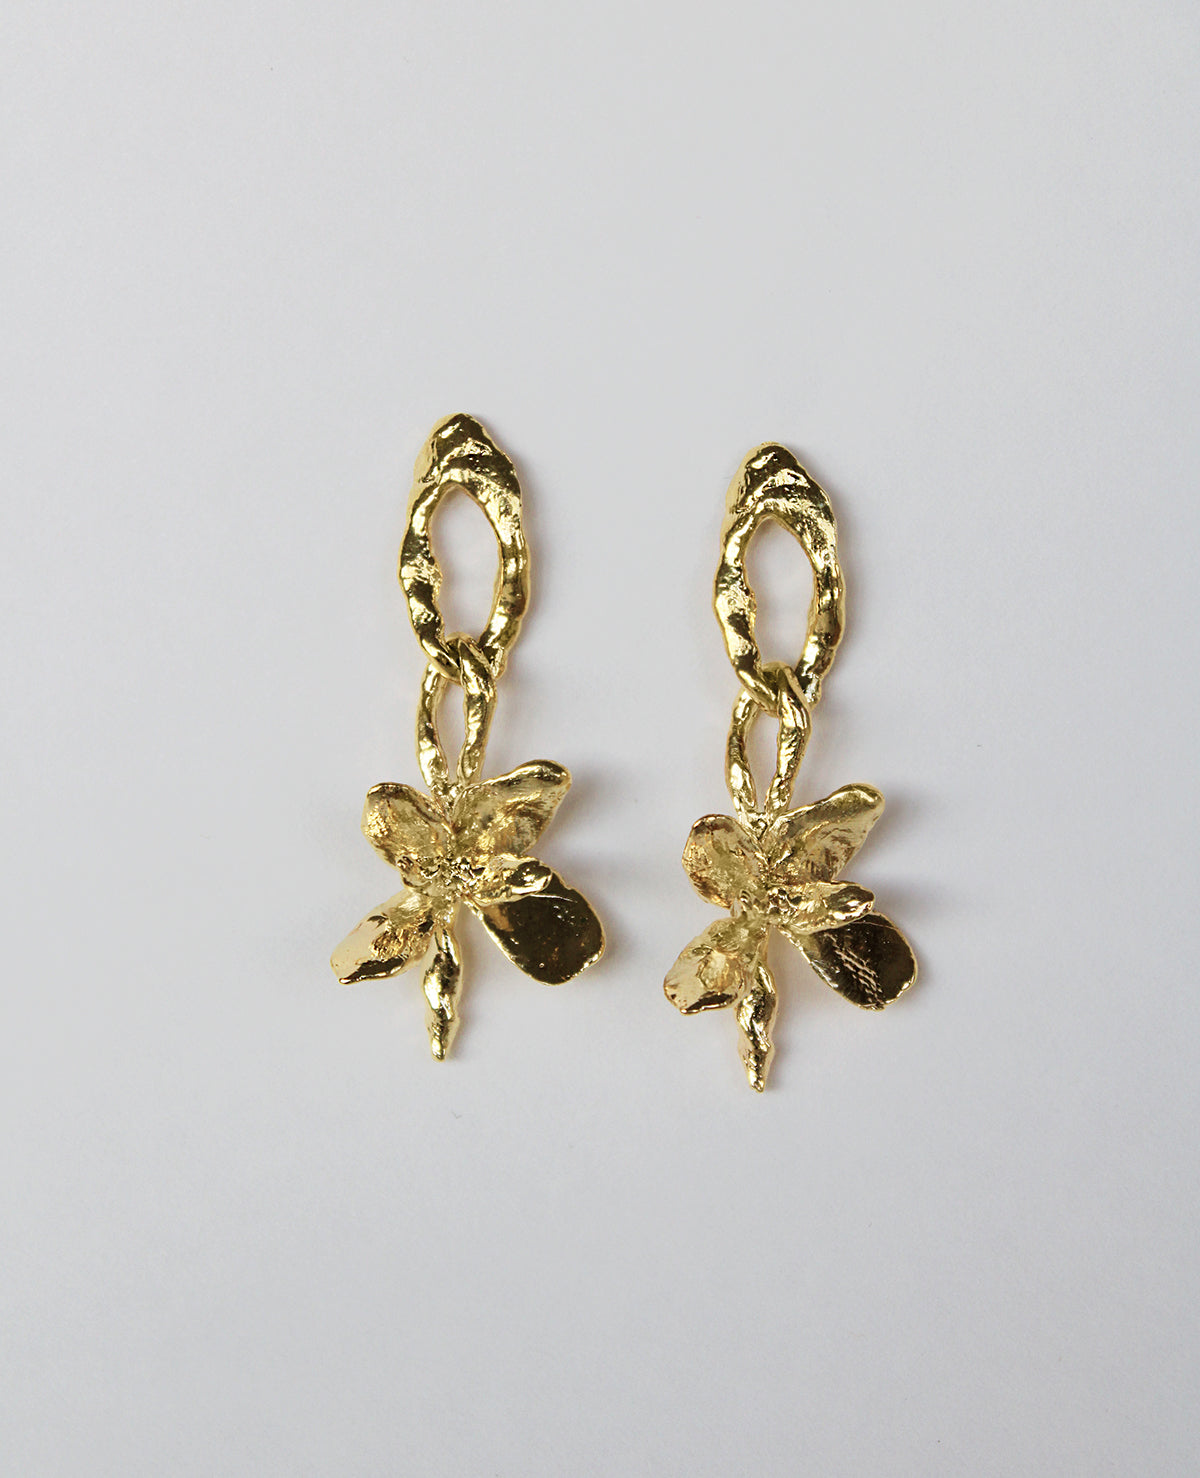 CHUNKY LILIES // golden earrings - ORA-C jewelry - handmade jewelry by Montreal based independent designer Caroline Pham